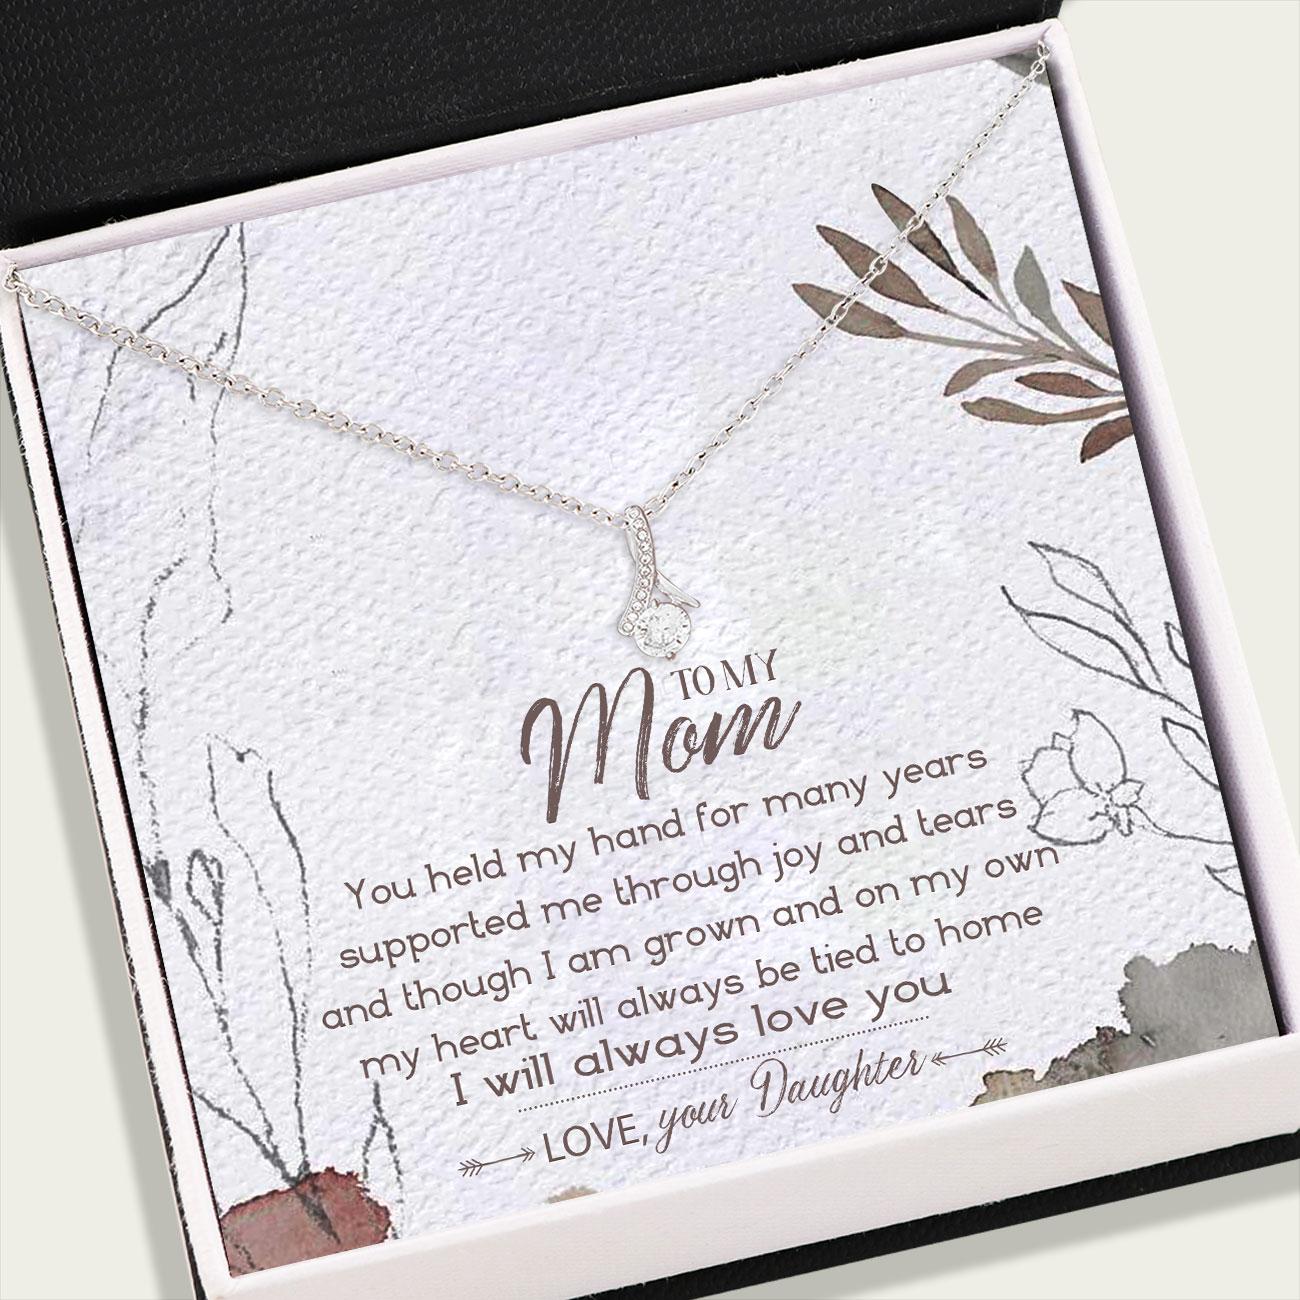 Mom Necklace, To My Mom Necklace Card - Alluring Beauty Necklace - Jewelry For Mom Gifts